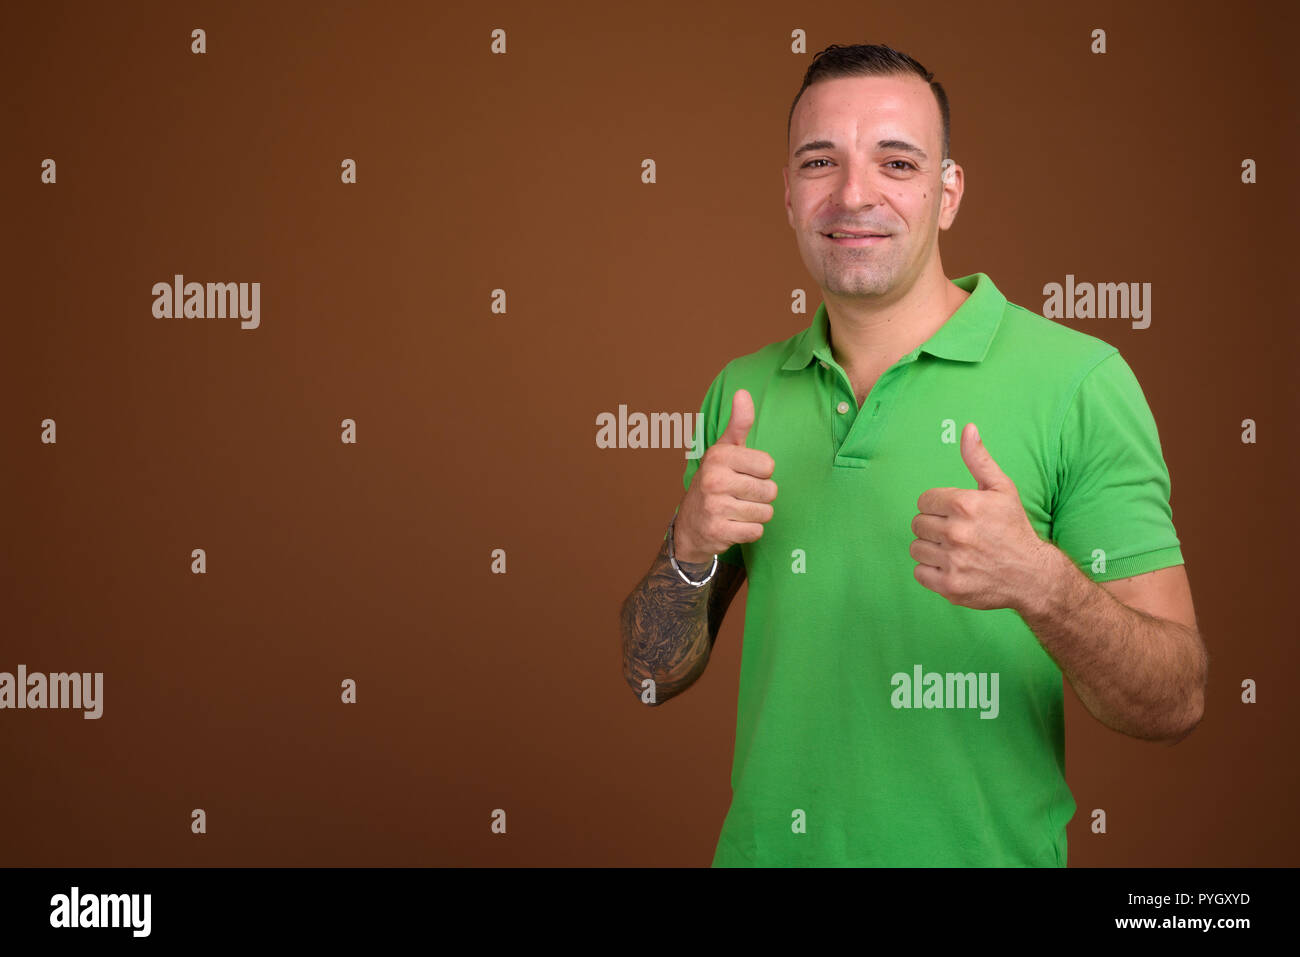 Man wearing green shirt against brown background Stock Photo